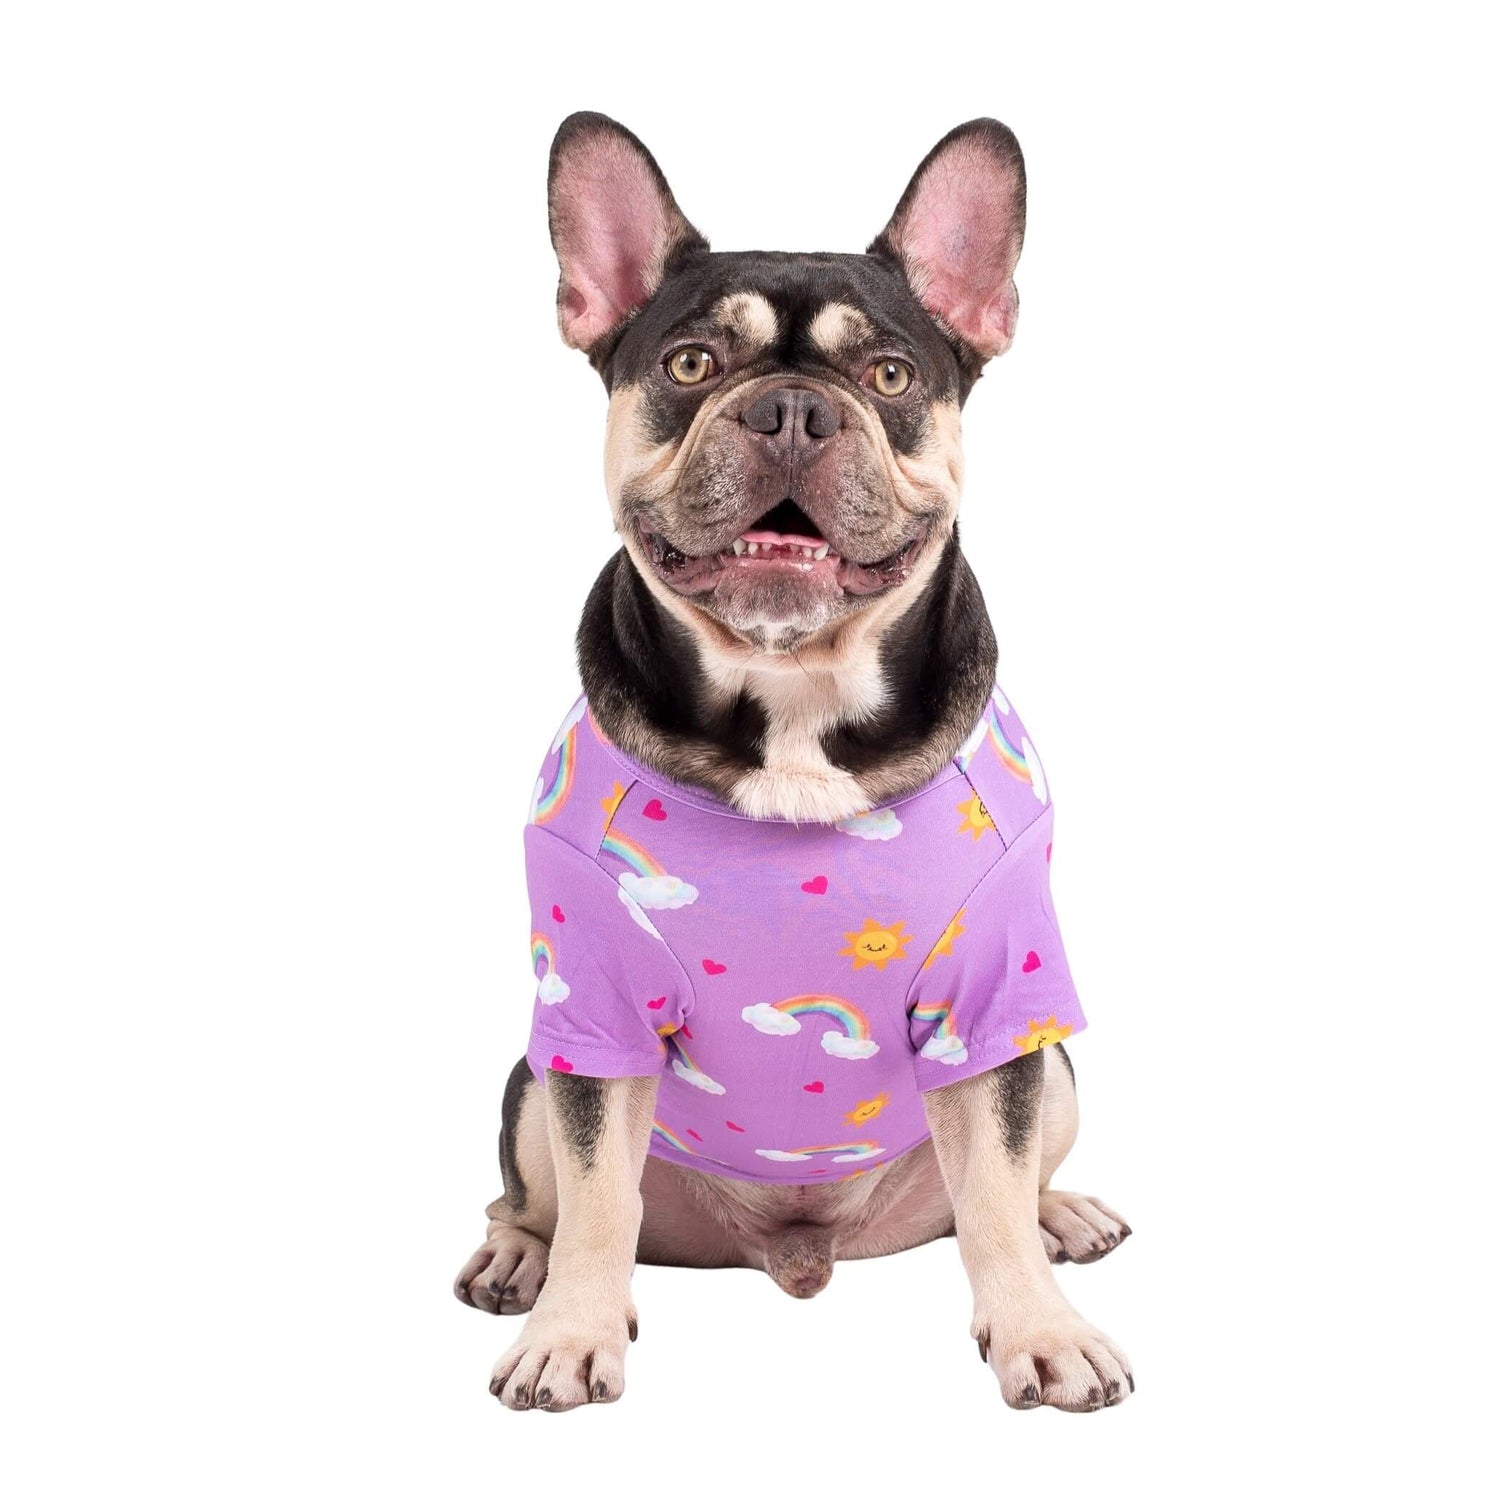 A French Bulldog standing front on wearing Vibrant Hound's Chasing Rainbow pyjamas for dogs. The dog shirt is purple with rainbows, bright suns, and love hearts printed on it.